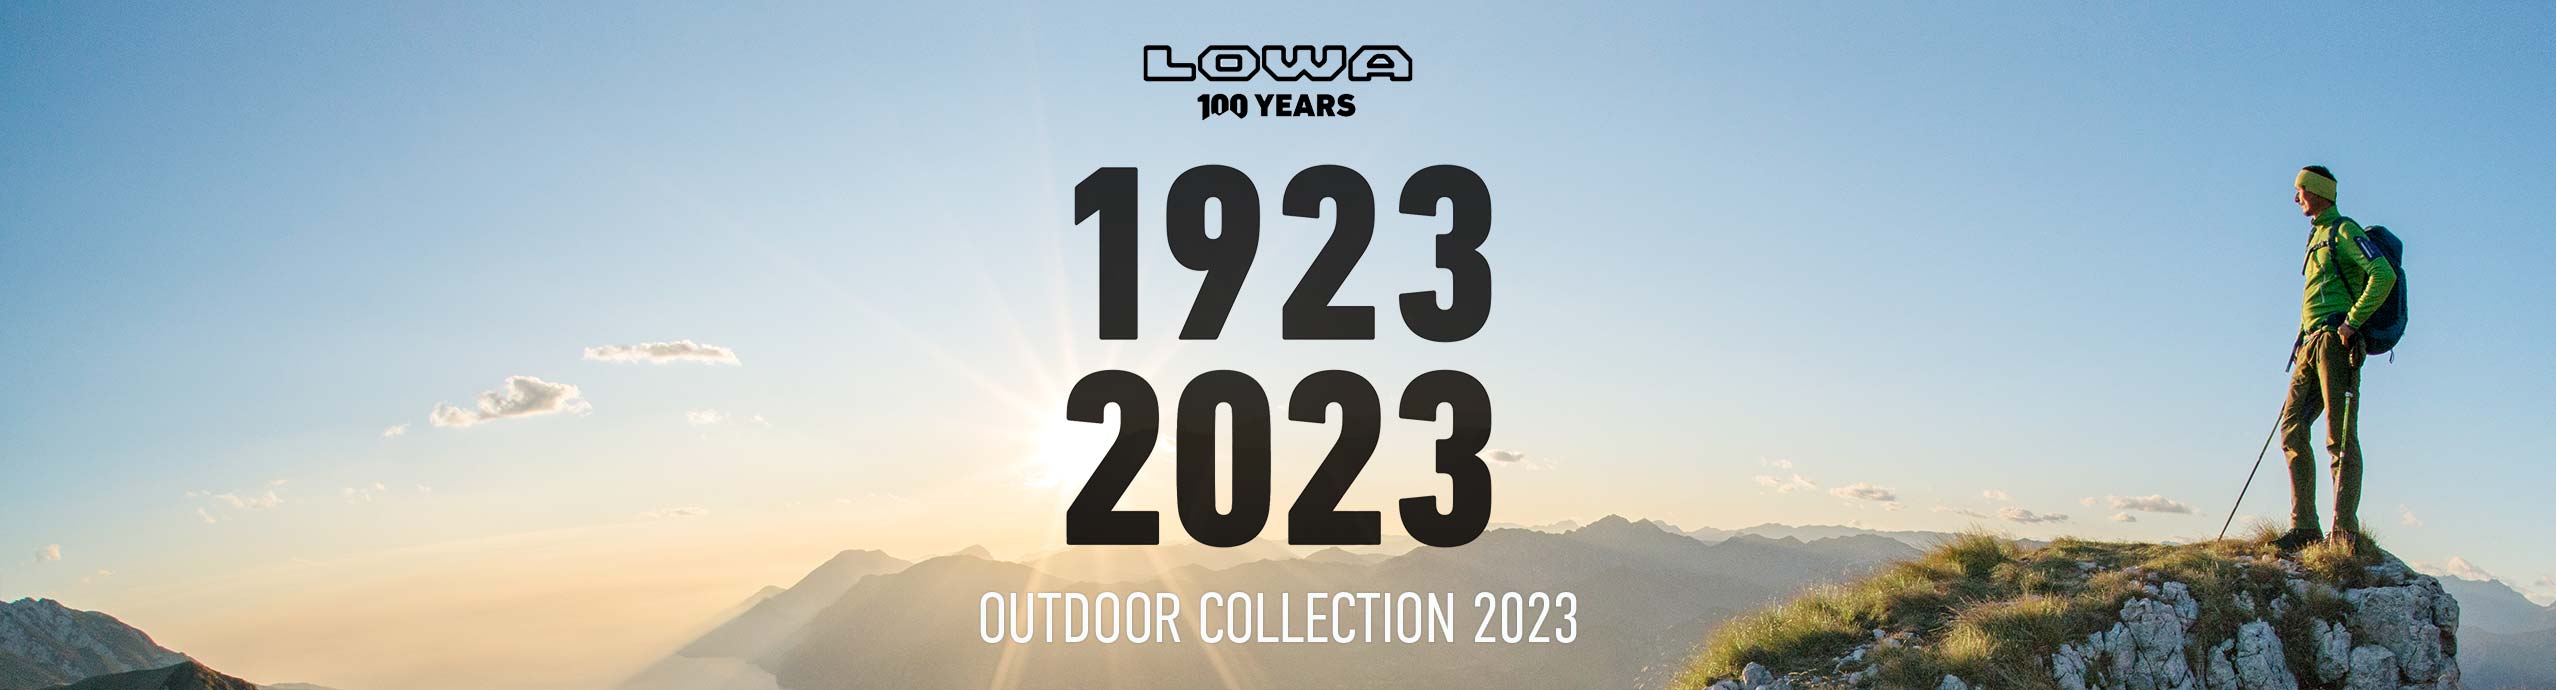 LOWA 100 Years - 1923-2023 - Outdoor Collection 2023